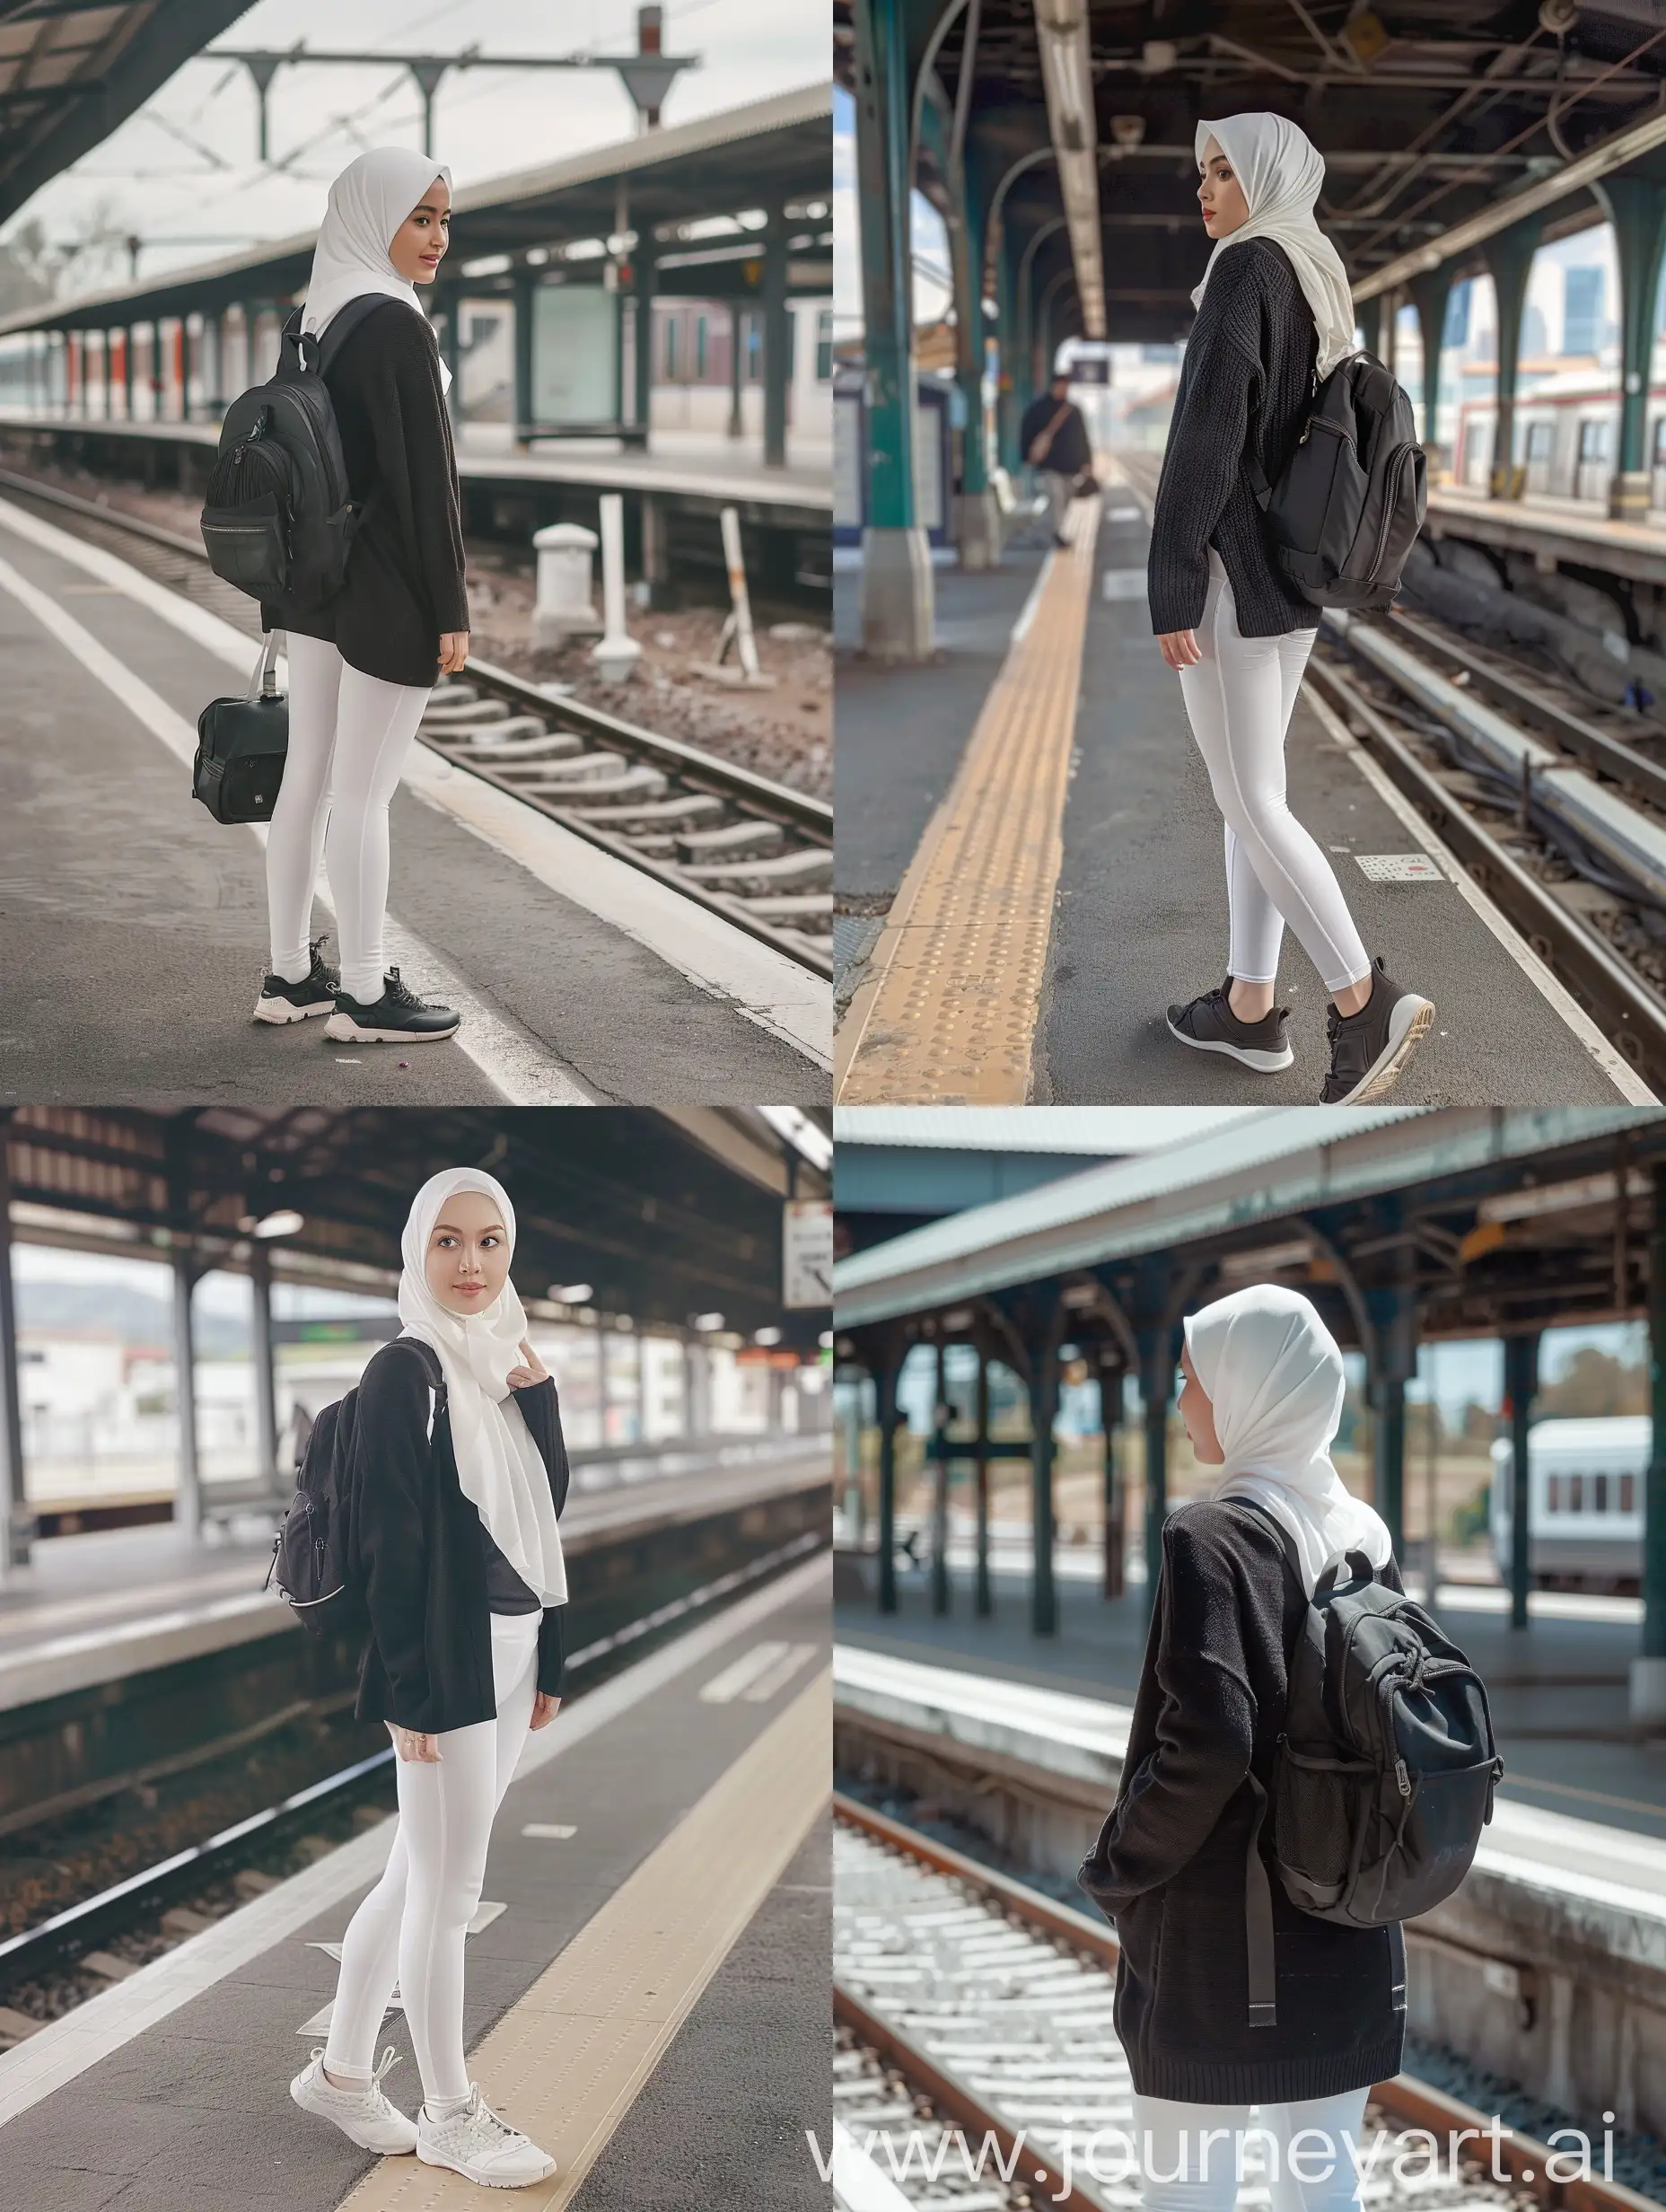 Indonesian-Woman-in-White-Hijab-at-Train-Station